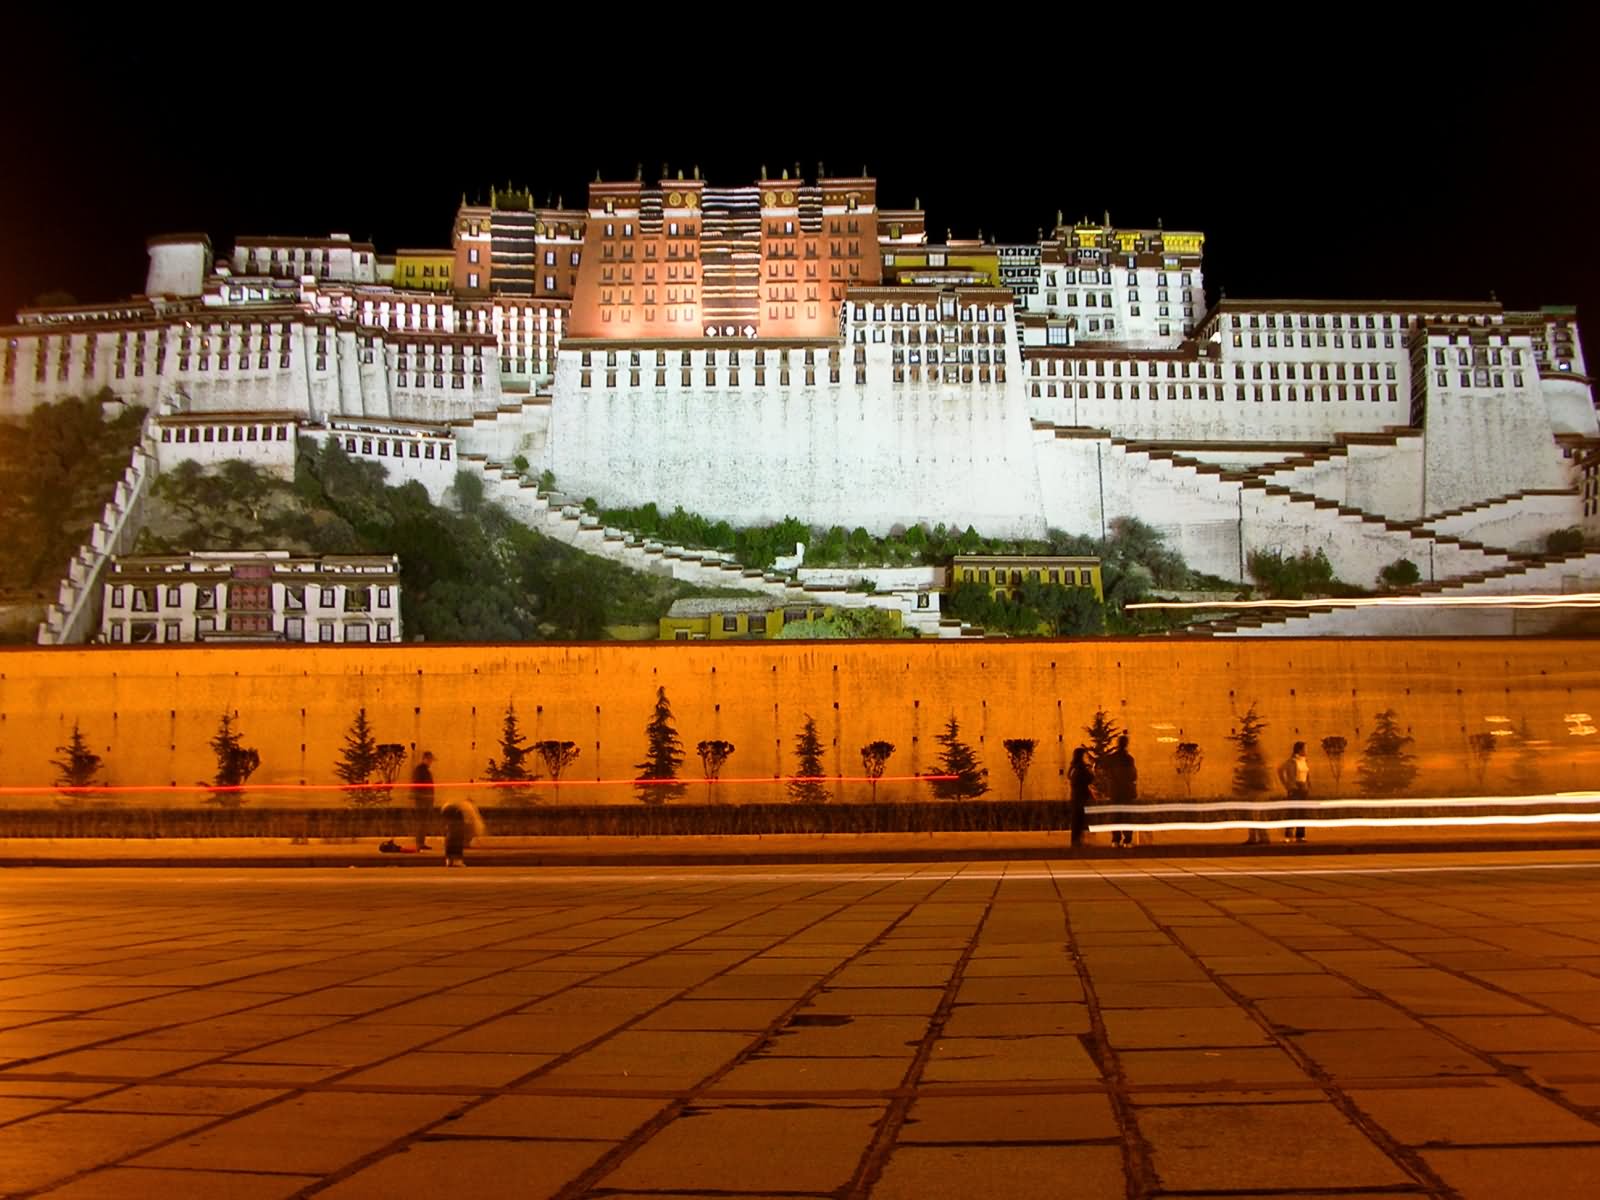 30 Most Incredible Night View Pictures And Photos Of Potala Palace In Tibet, China